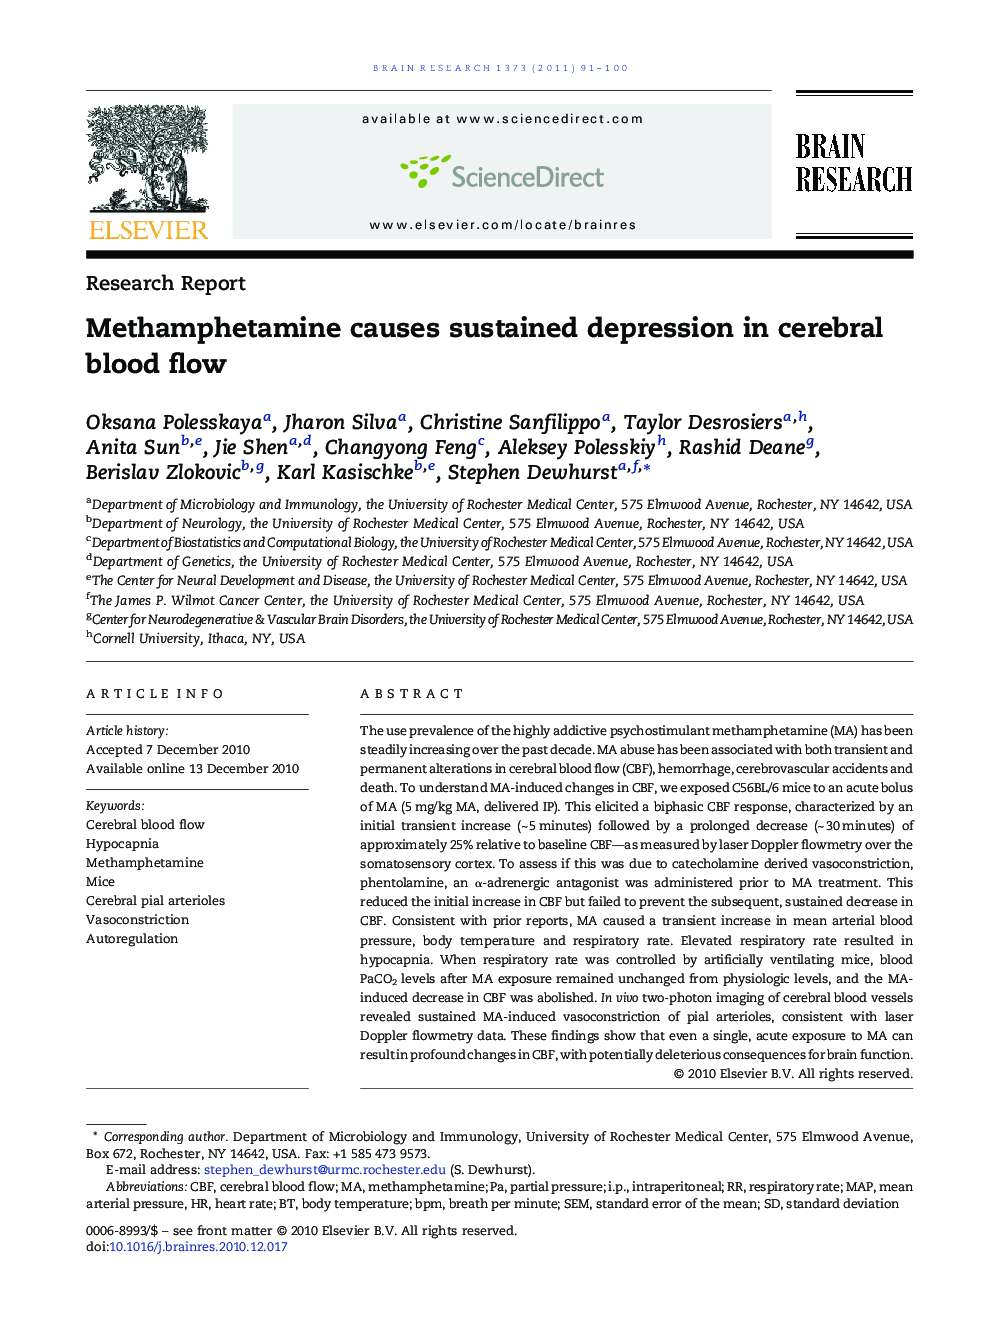 Research ReportMethamphetamine causes sustained depression in cerebral blood flow